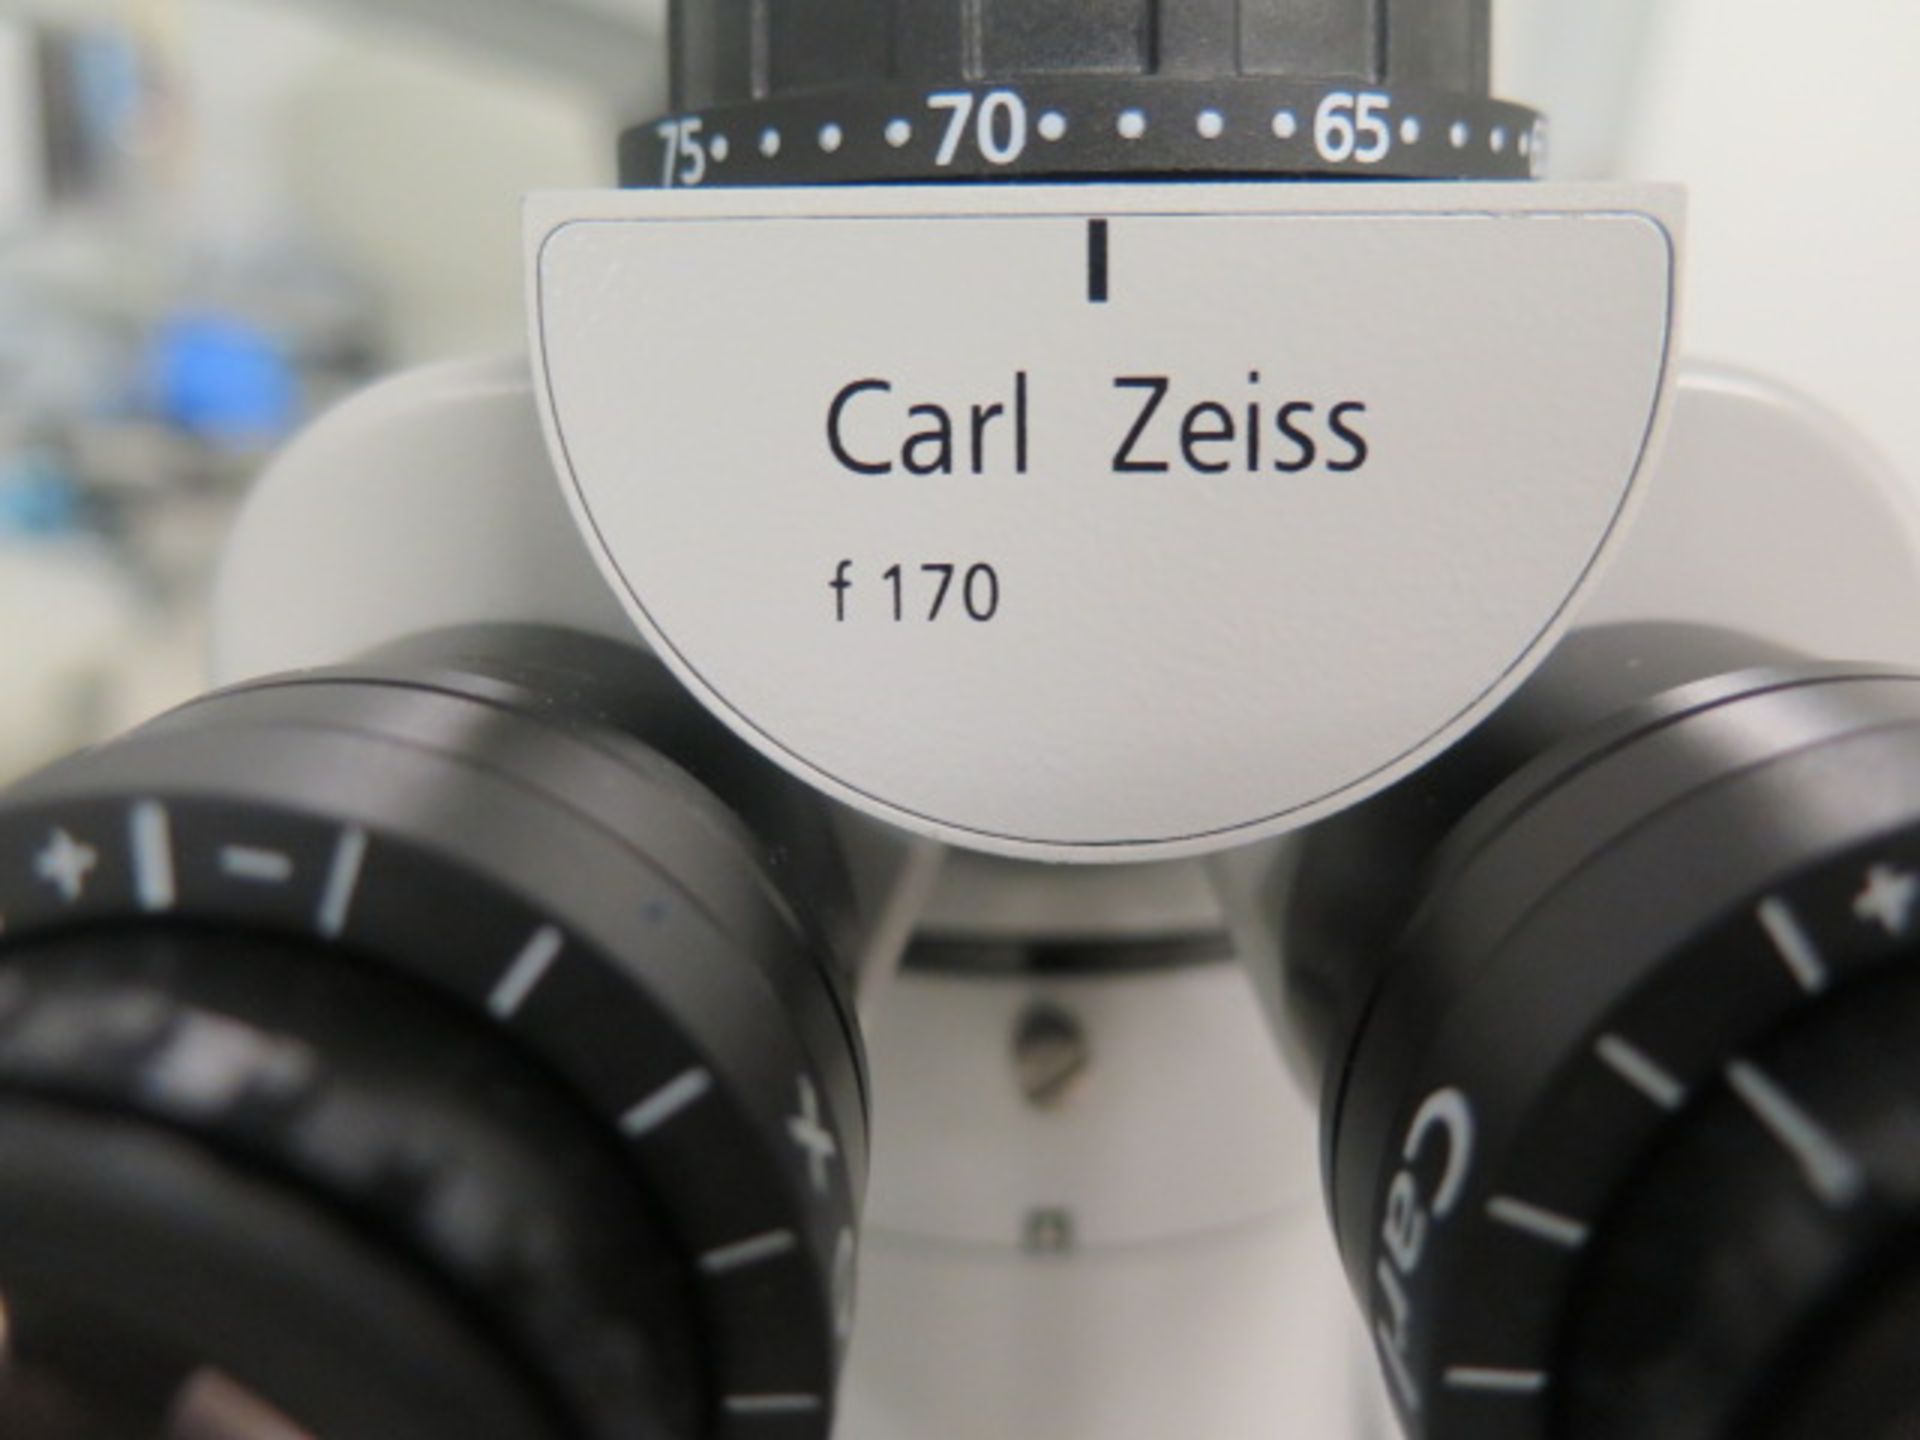 Zeiss Surgical GmbH Surgical Video Microscope s/n 6627125528 w/ MediLive Video Control Unit, Live - Image 6 of 7